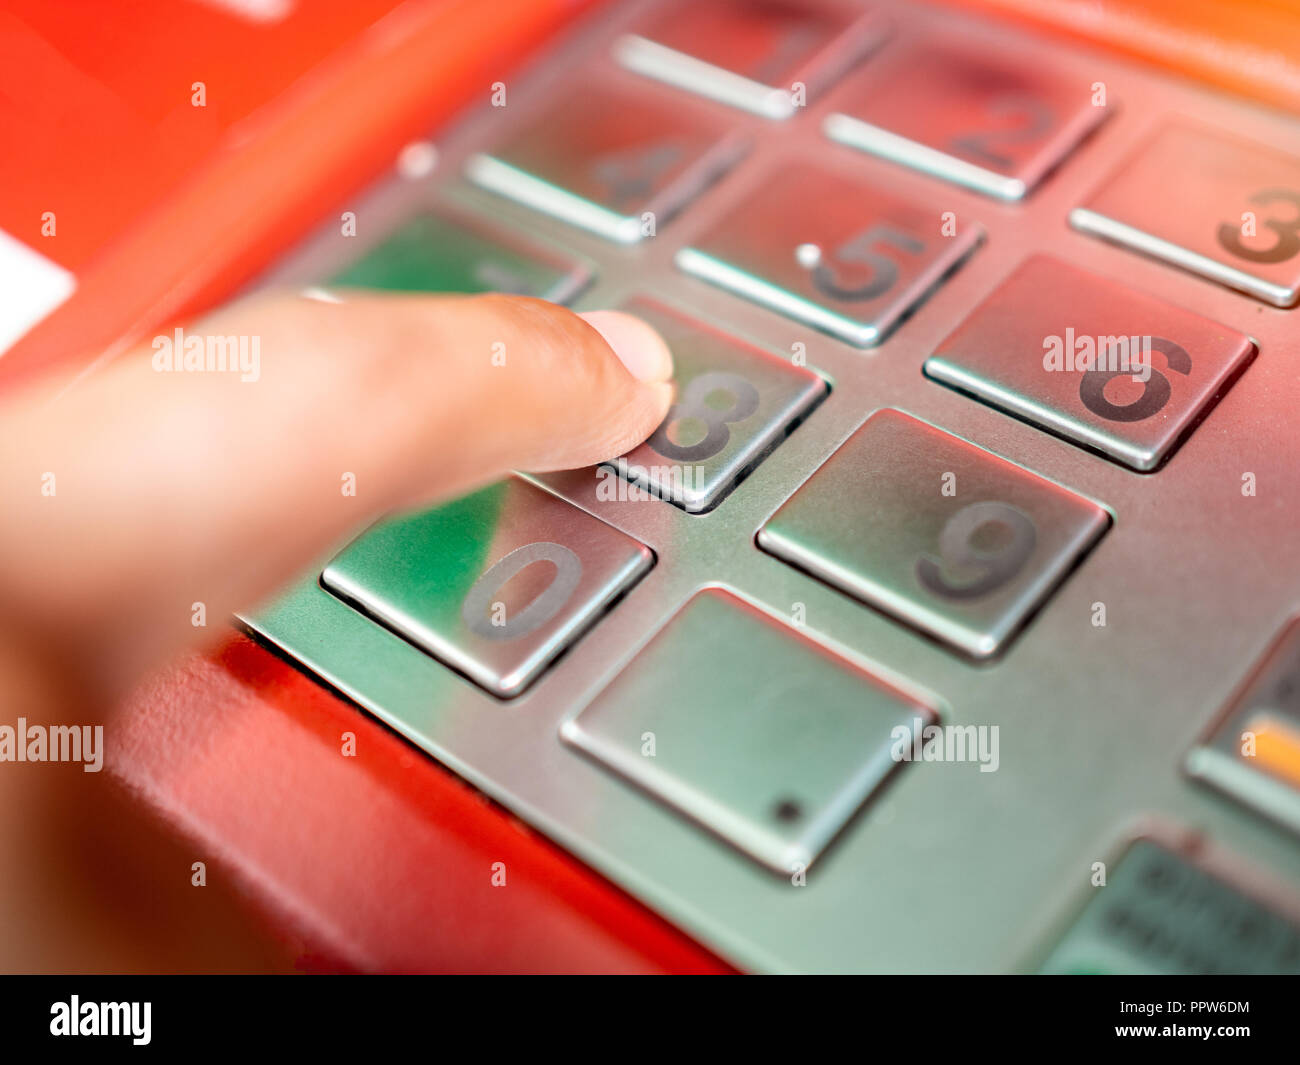 Close up finger inserting password on ATM machine. Hand entering ...